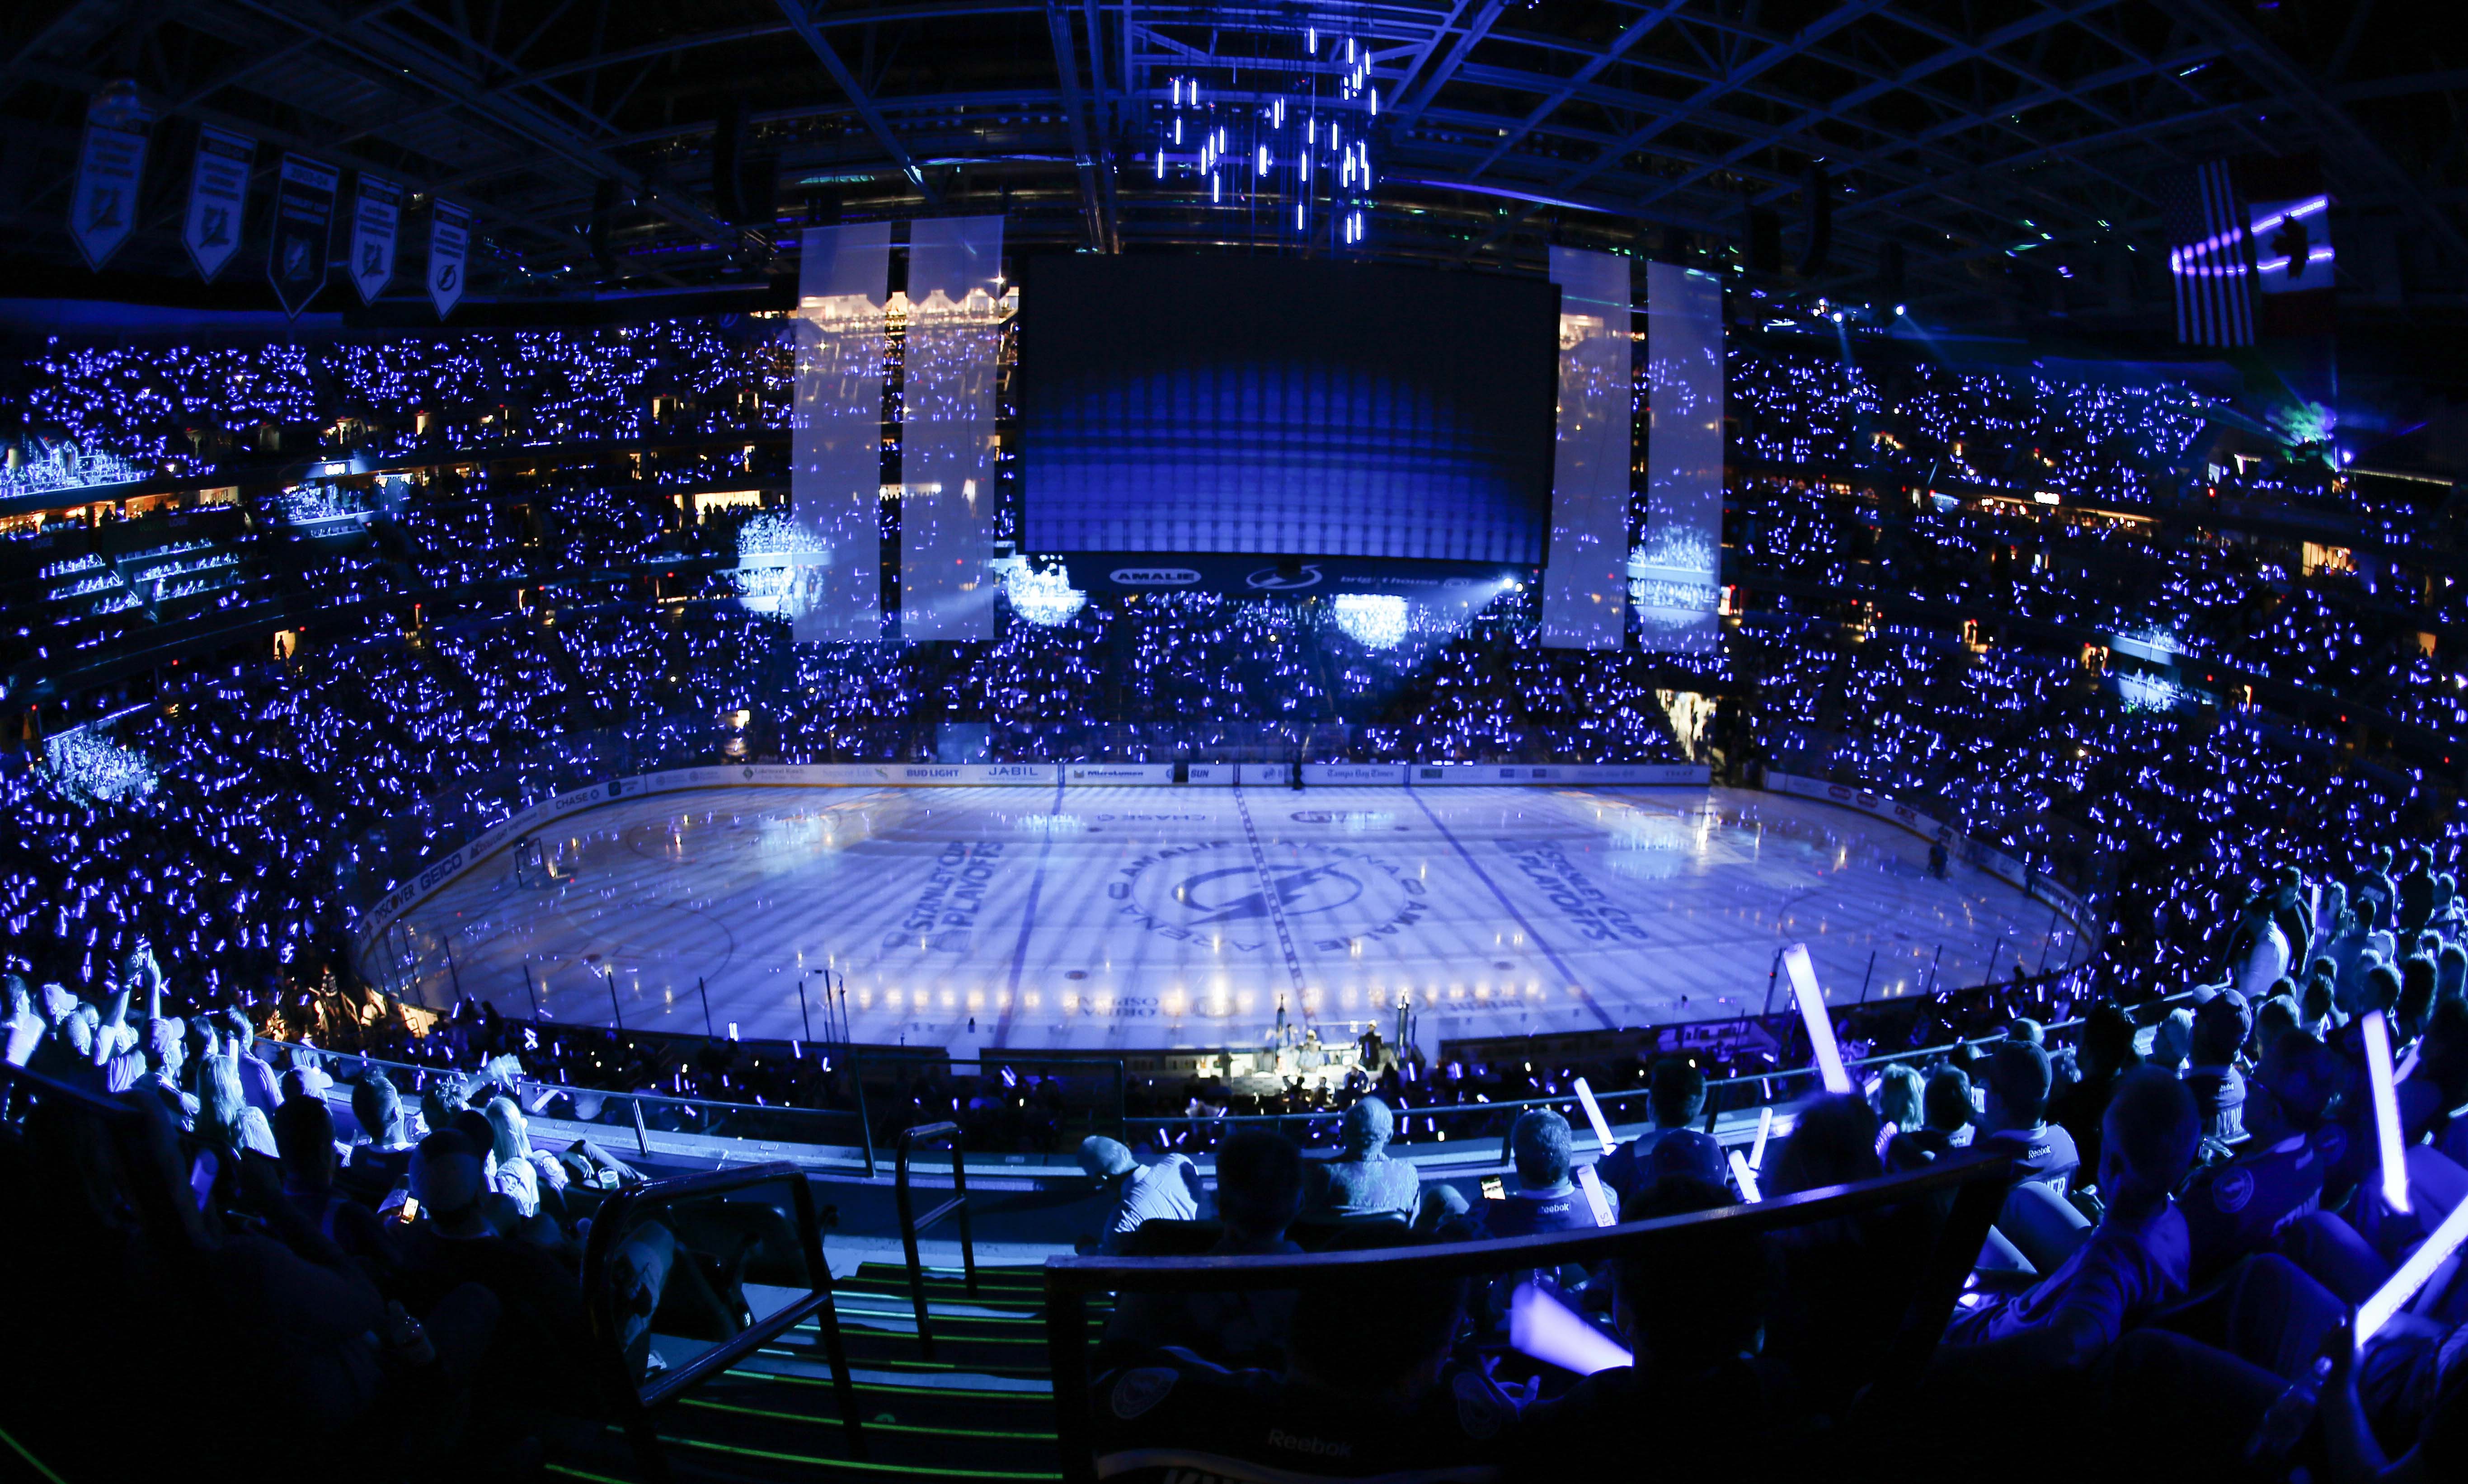 NHL: Stanley Cup Playoffs-Pittsburgh Penguins at Tampa Bay Lightning